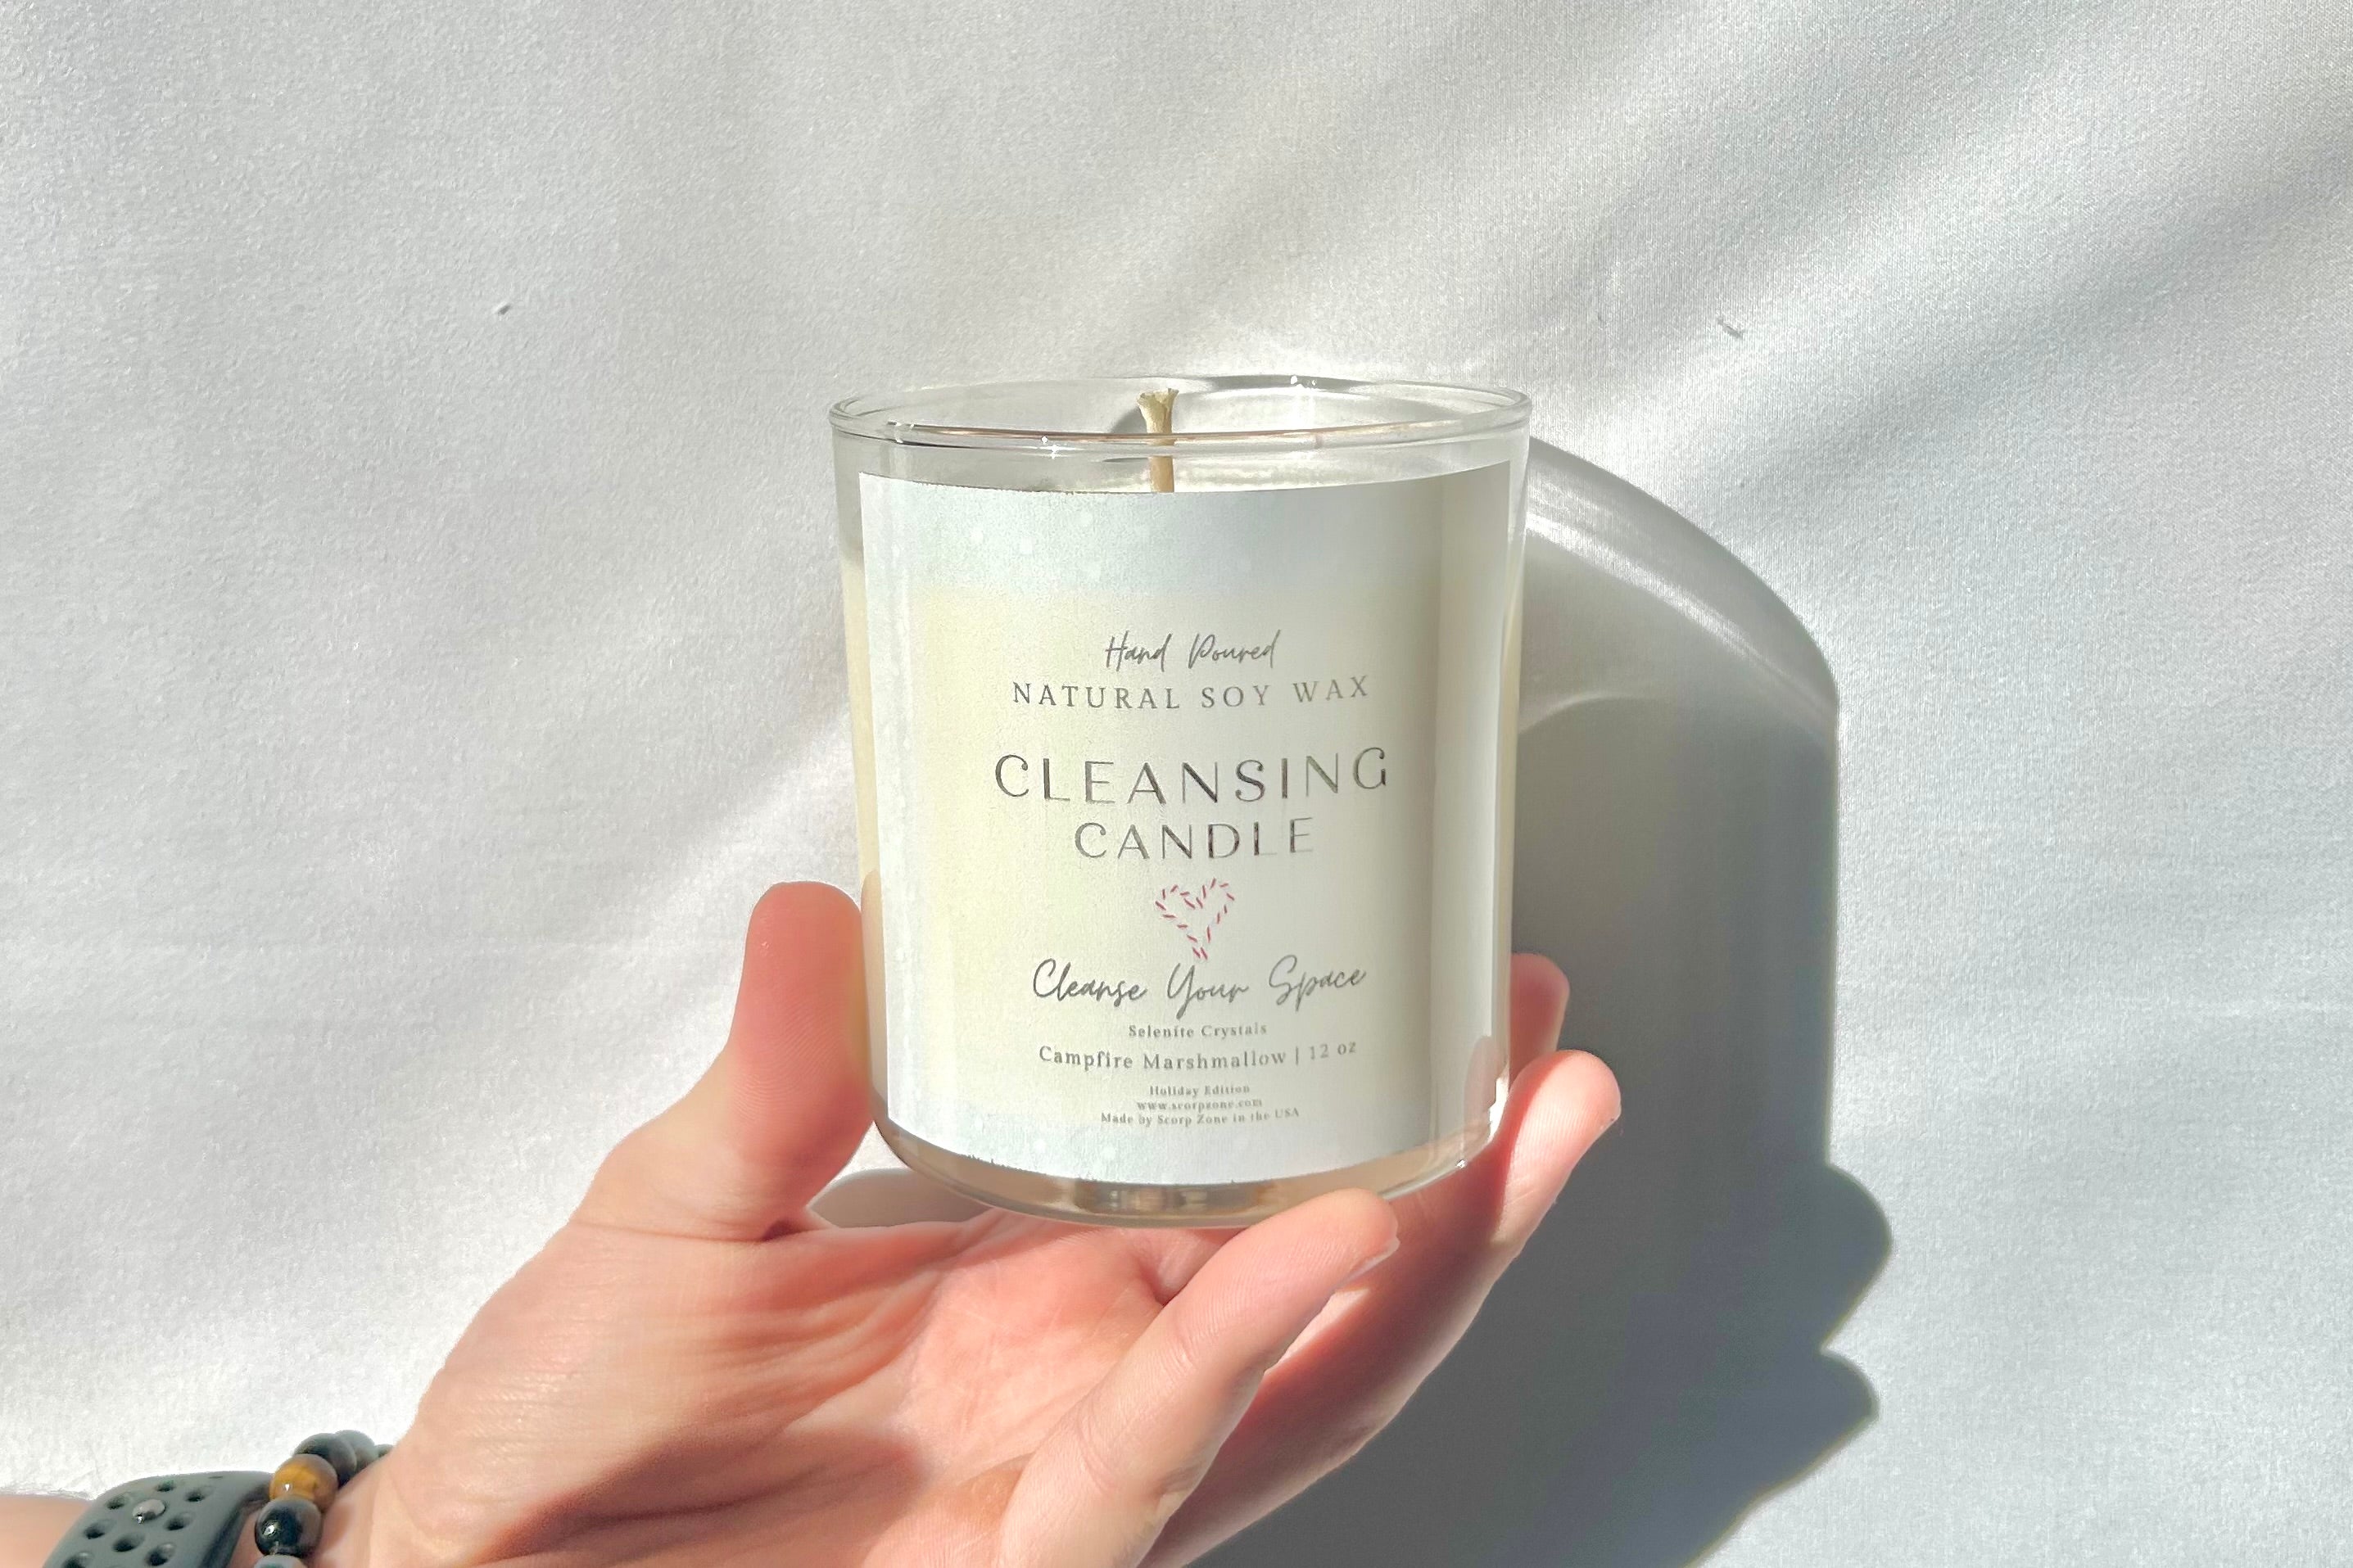 Cleansing Crystal Soy Wax Candle by Scorp Zone